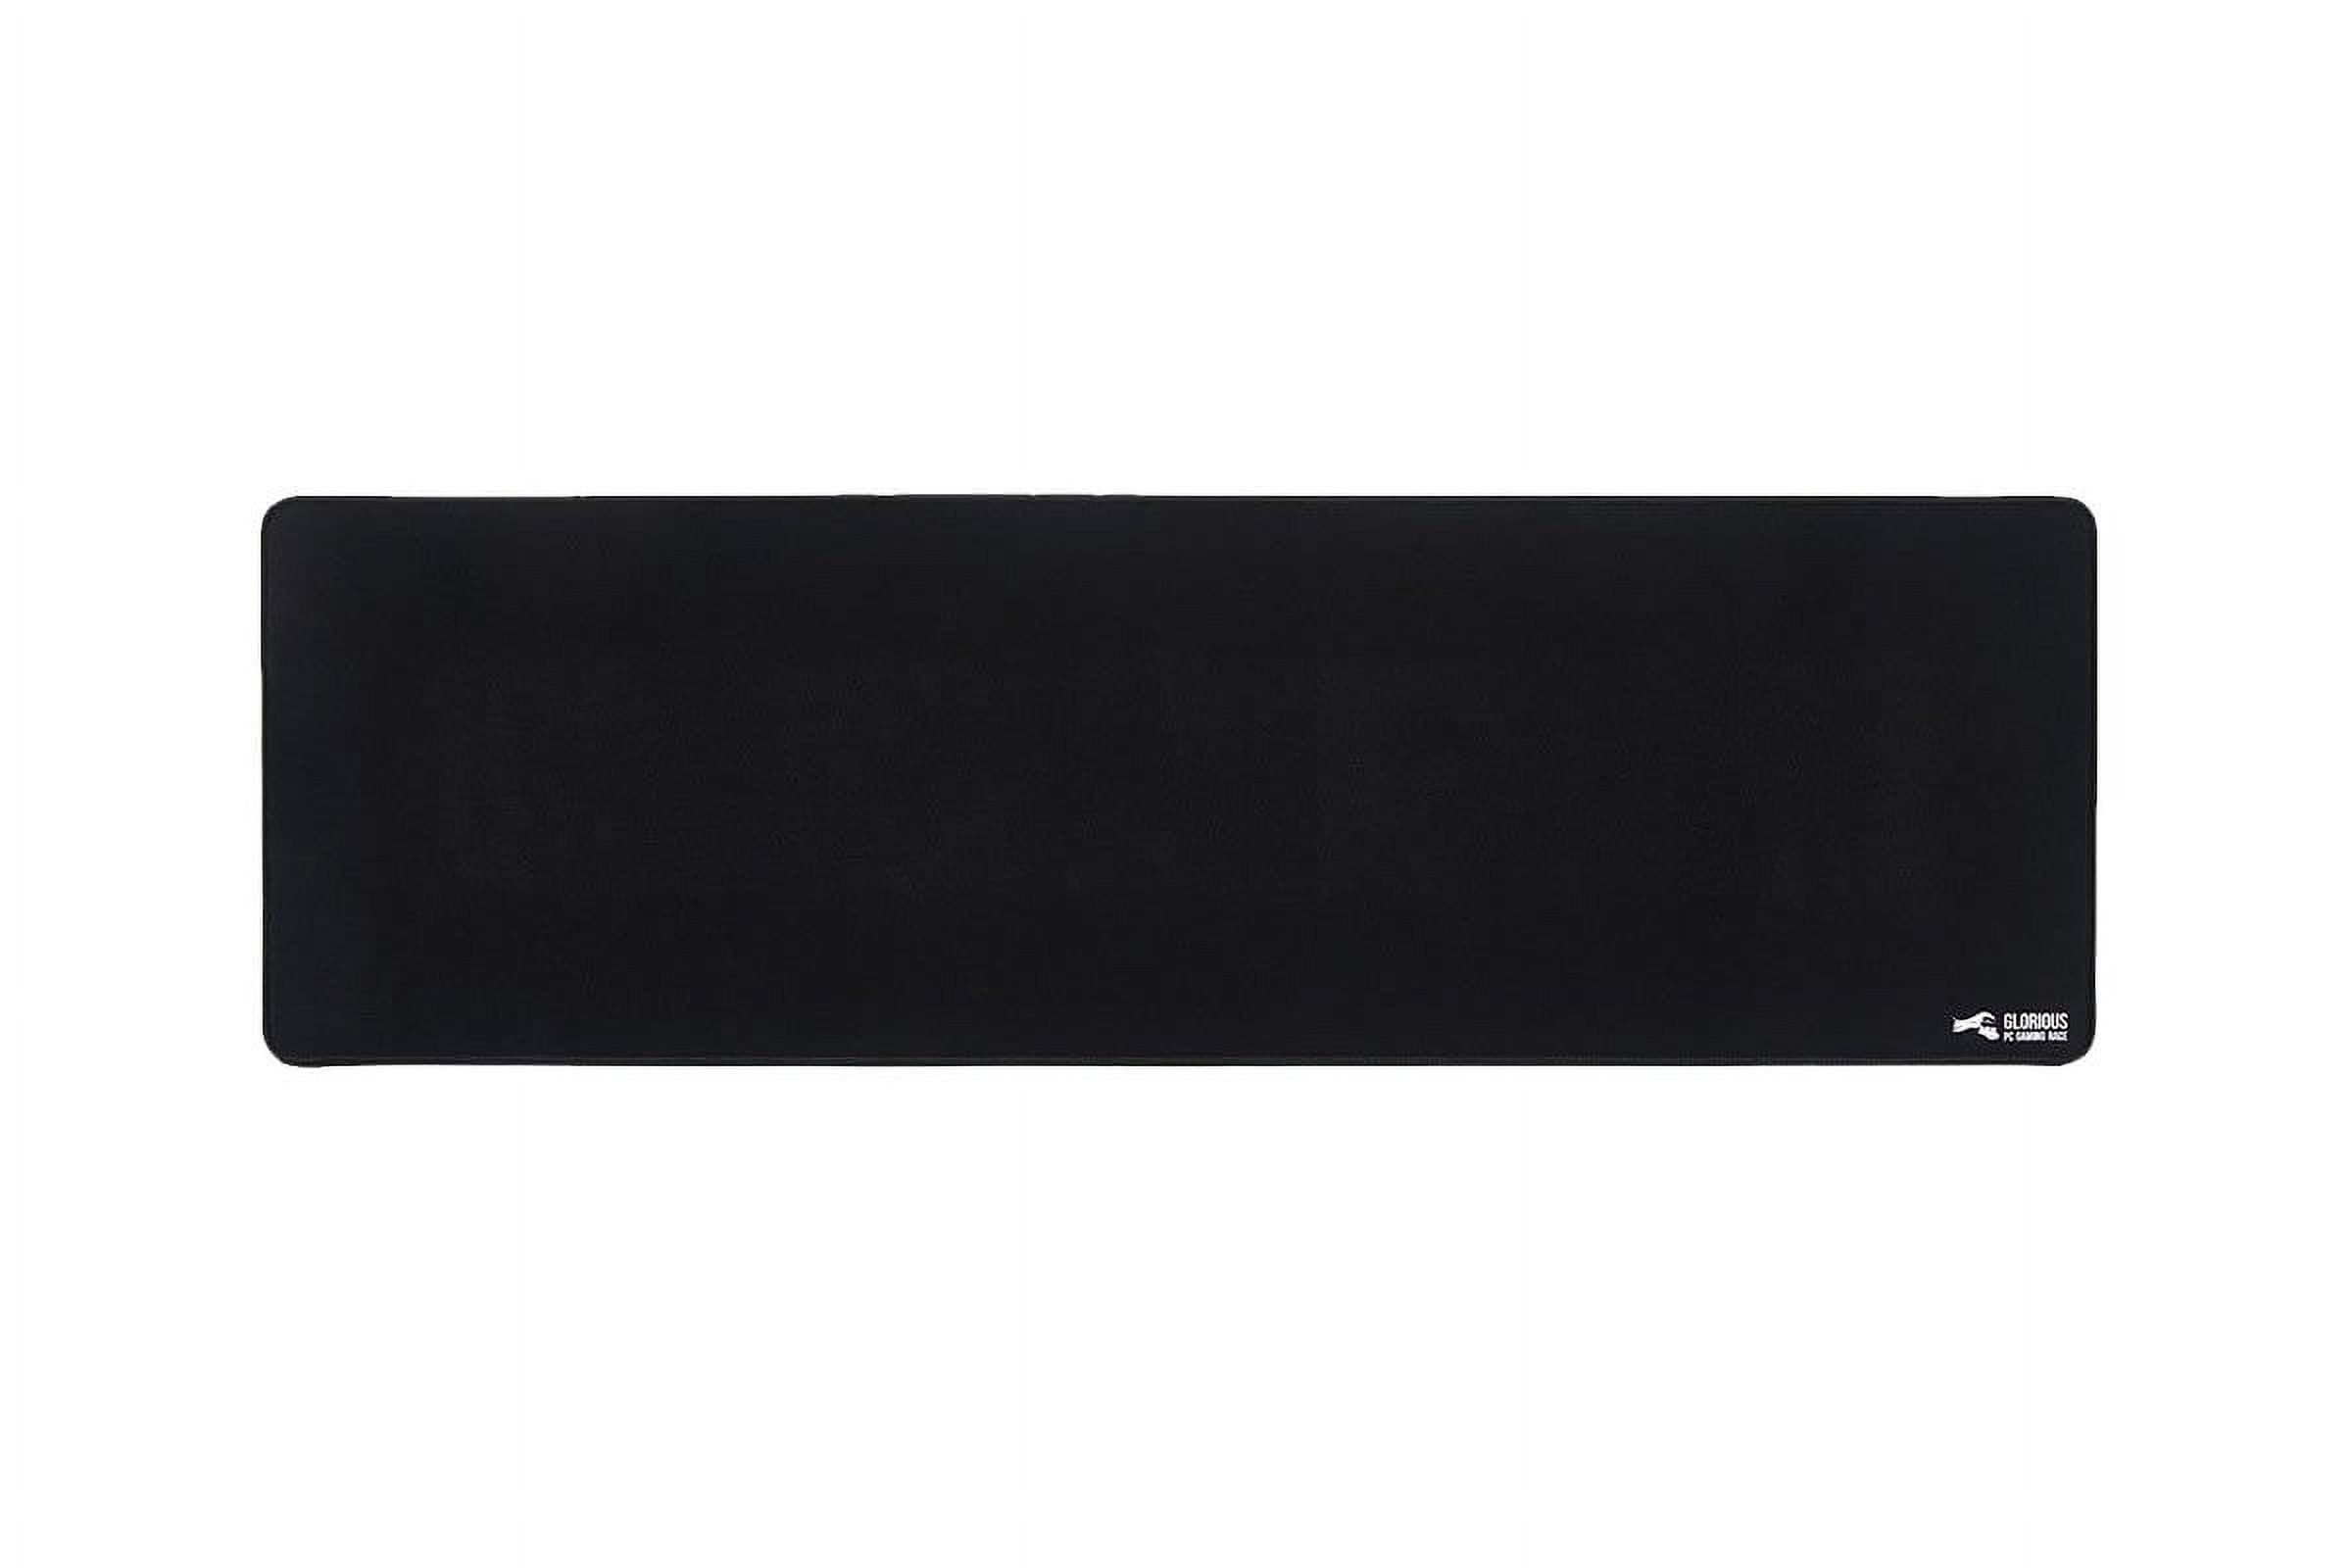  Glorious Large Extended White Gaming Mouse Pad/Mat - Long  Cloth Mousepad, Stitched Edges